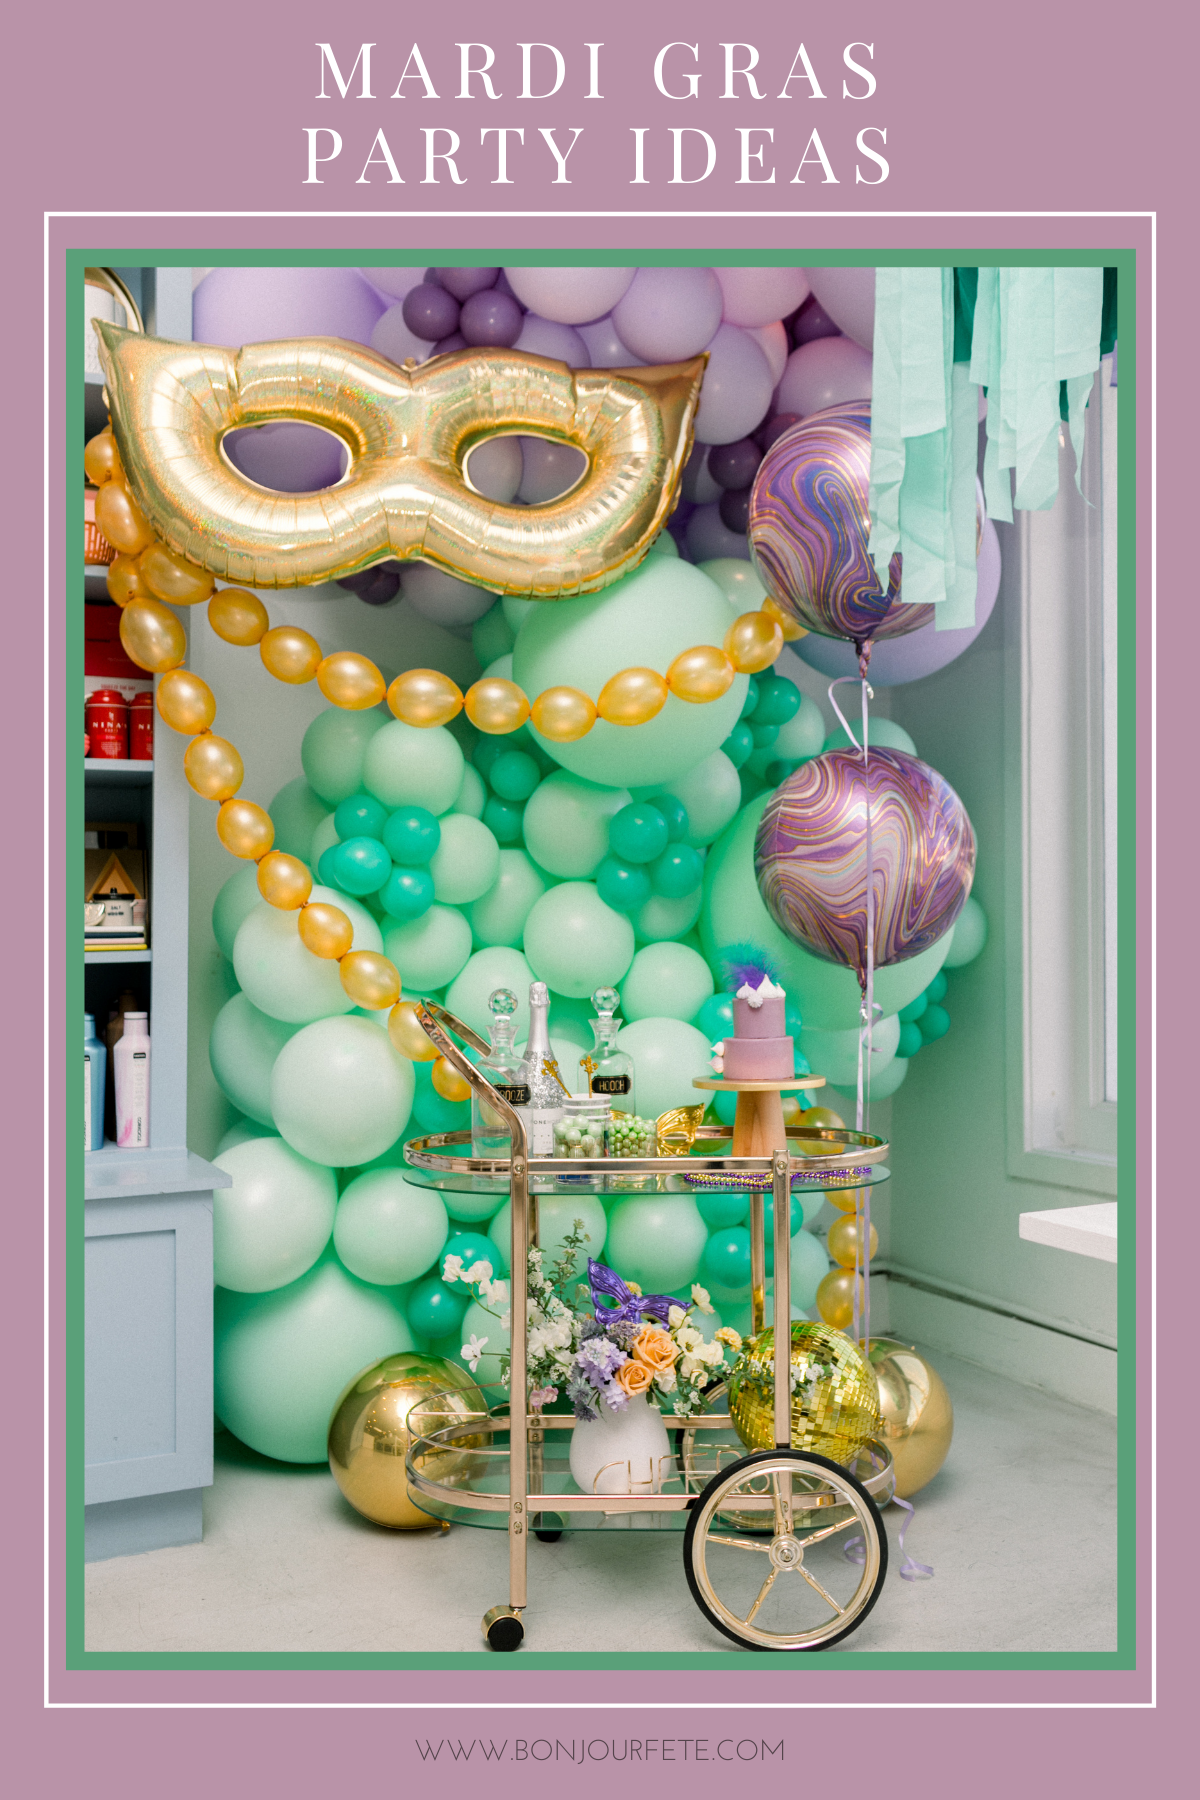 Dress Up Your Party with Mardi Gras Fringe Party Banner